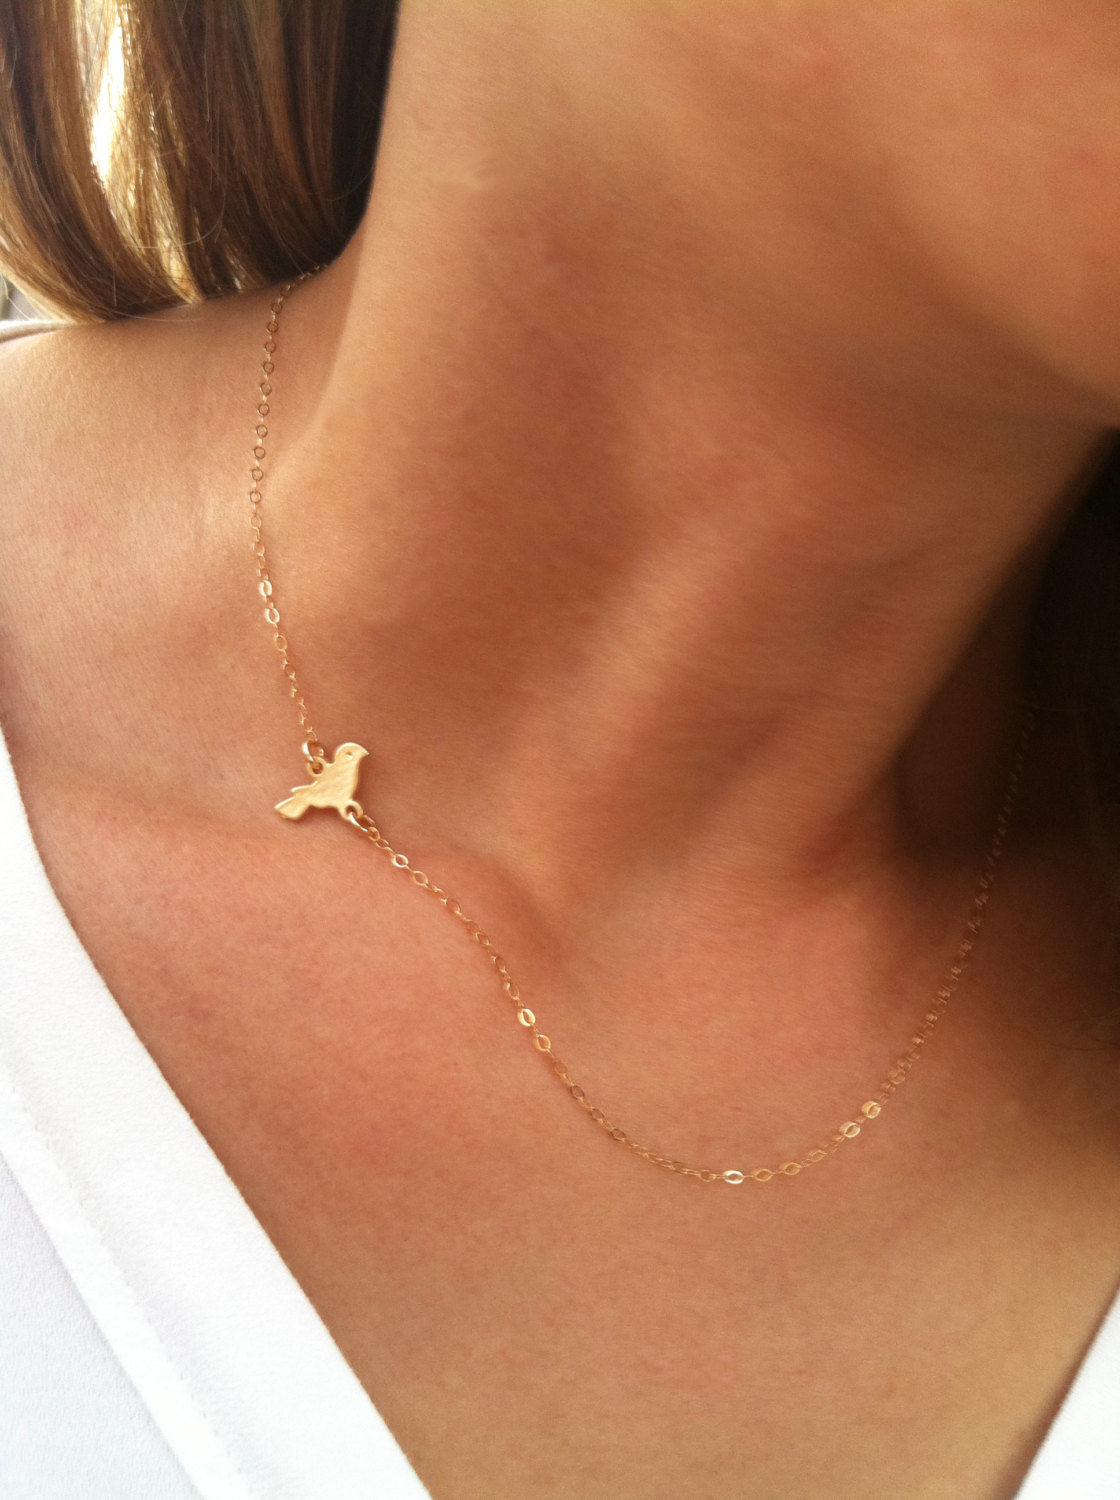 Gold Necklace, Tiny Bird Necklace, Bird Charm, Baby Shower Gift, Delicate Goldfilled Necklace, Everyday Necklace, Gold Jewelry, Mother Gift